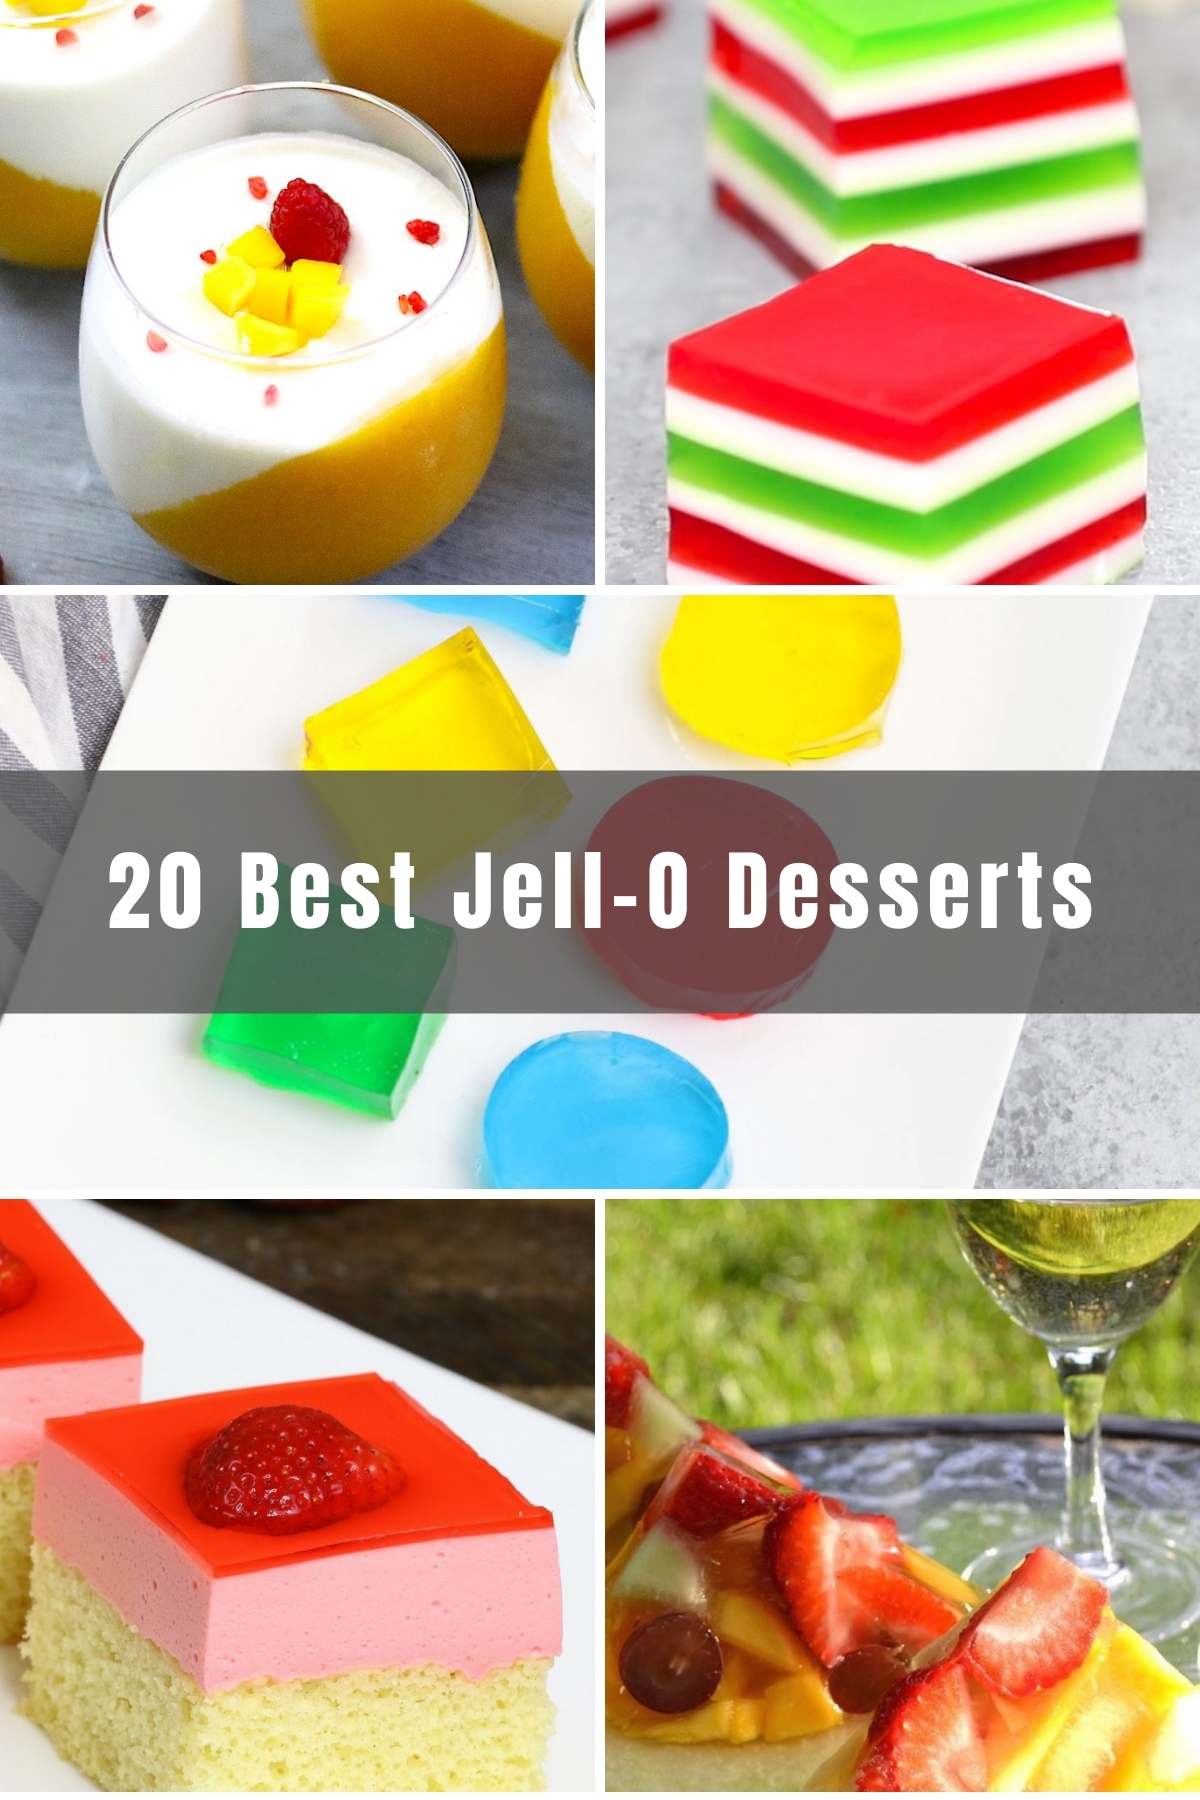 Jell-O is one of those childhood favorites that can still be enjoyed even as an adult. It’s great as a delicious snack or a delightful dessert. In this post, we’ve compiled the 20 Best Jello Recipes into one handy list. Whether you prefer a classic jello shot or want to take it up a notch with jello salad or a jello cake, you’re sure to find something you’ll enjoy here.